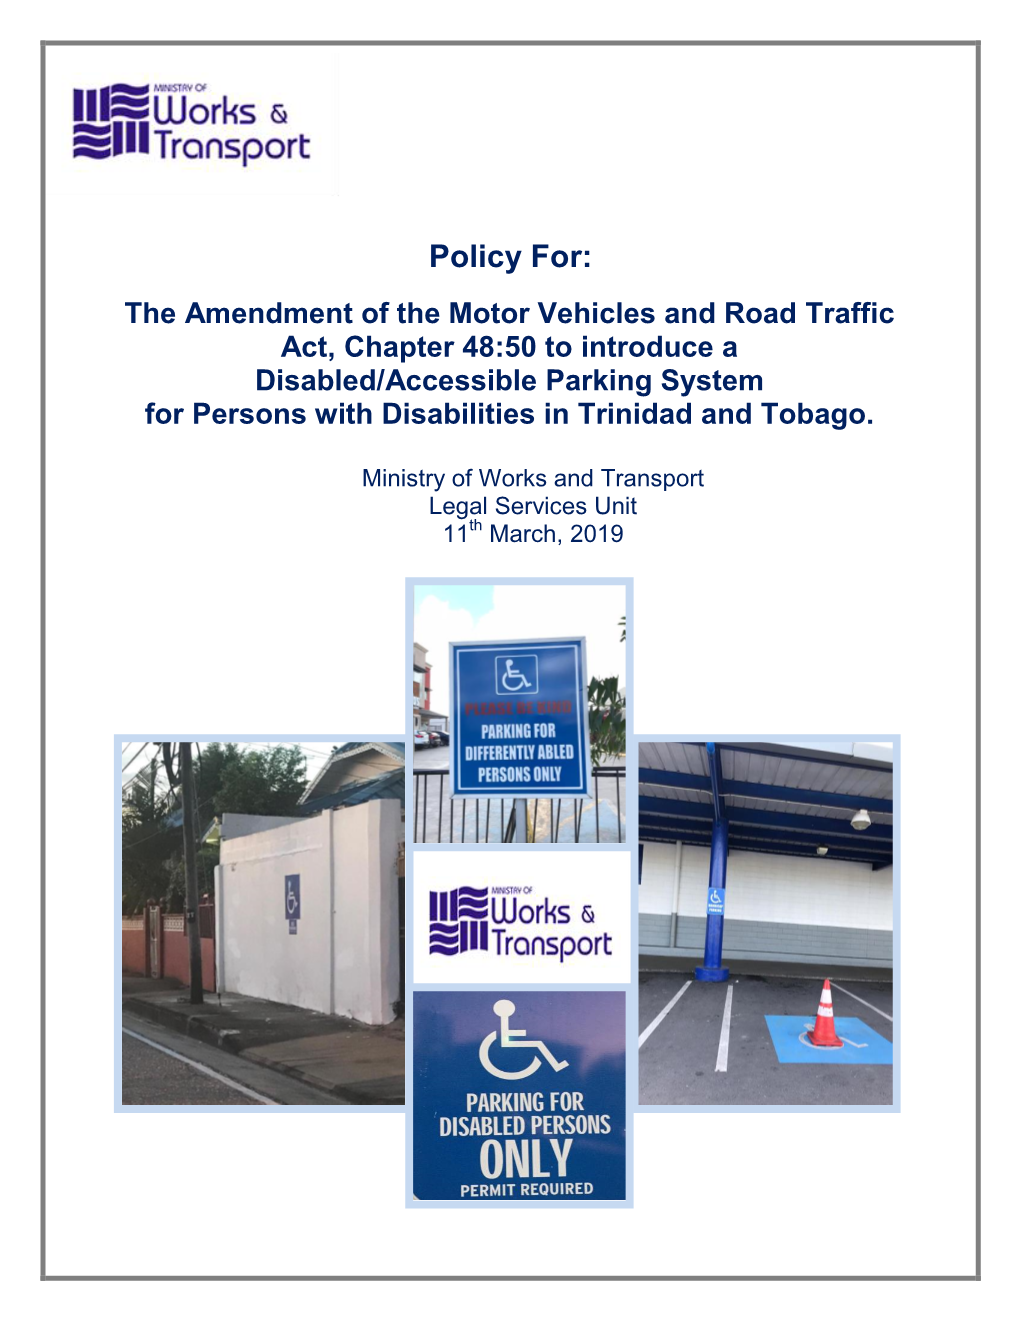 Policy For: the Amendment of the Motor Vehicles and Road Traffic Act